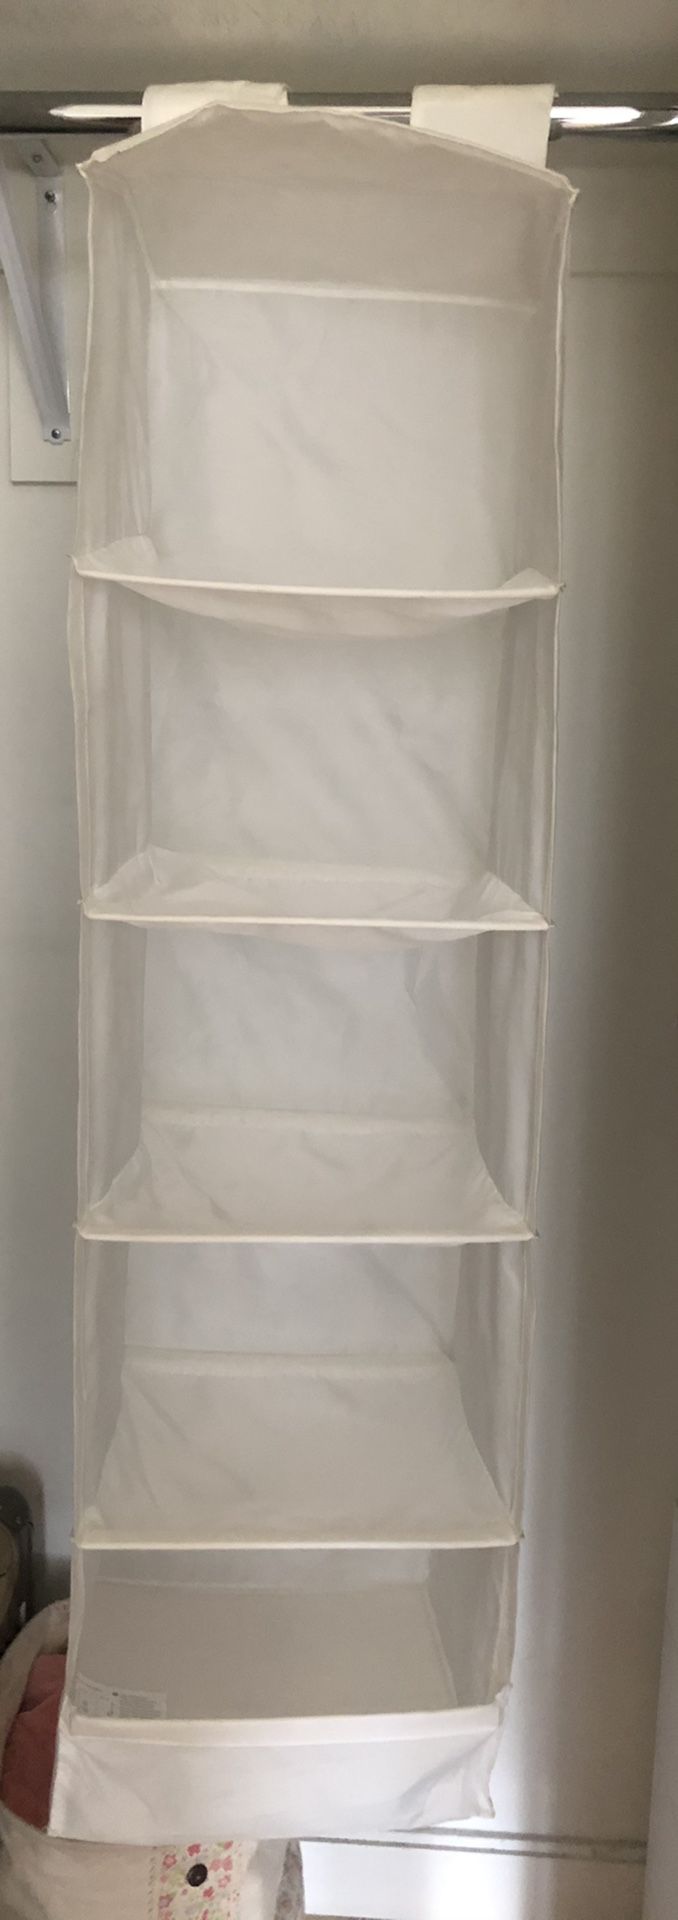 IKEA Hanging cloths organizer with 5 compartments